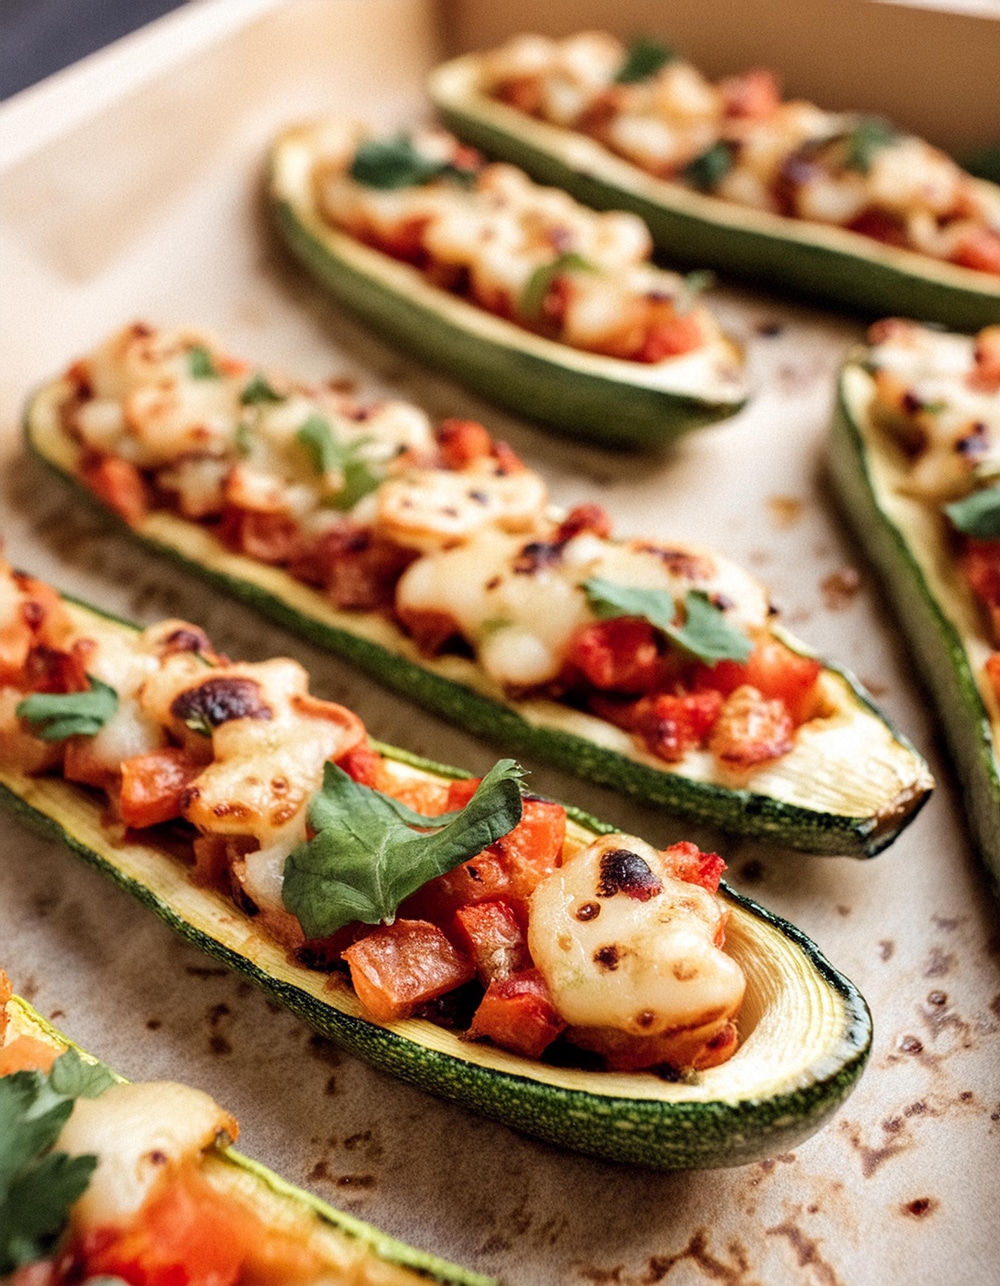 Spicy stuffed courgette